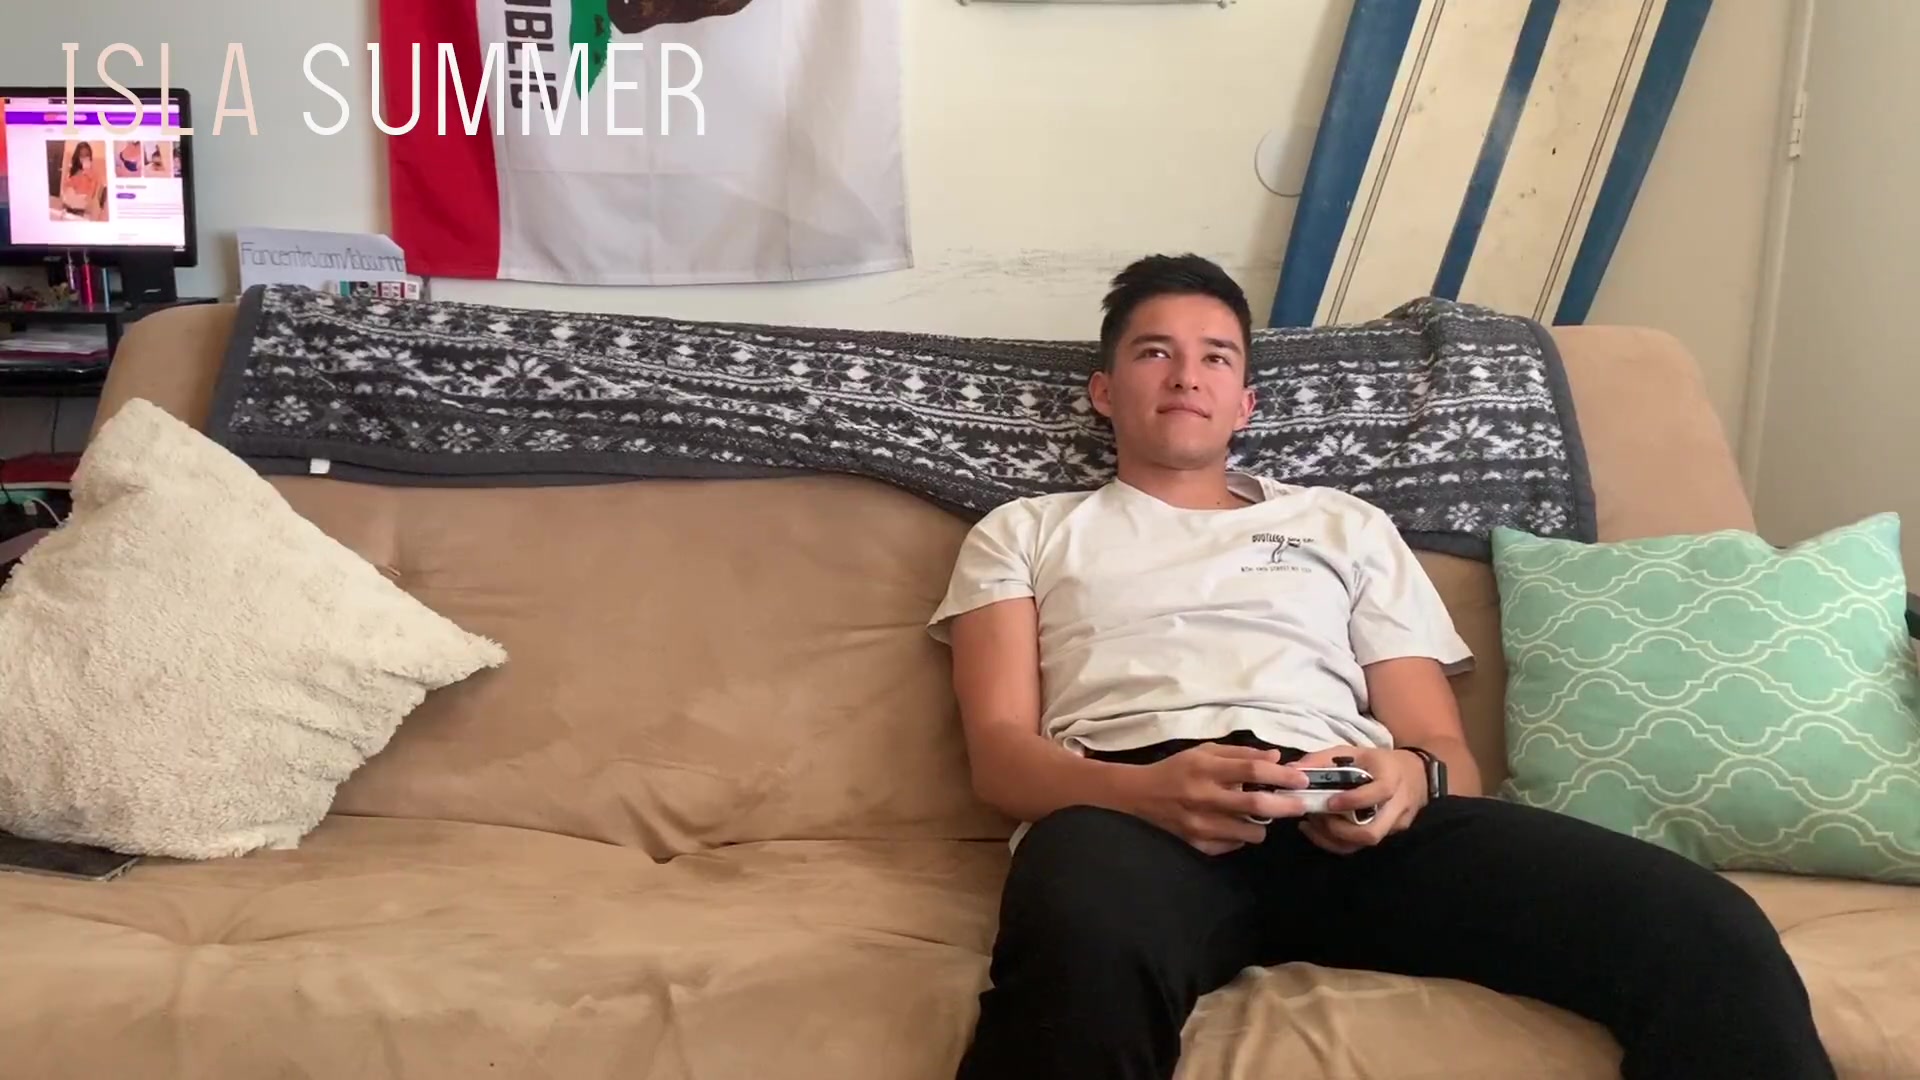 ISLA SUMMER – He Won’t Stop Playing 2k So i Ride a Dildo In Front Of Him To Make Him Fuck